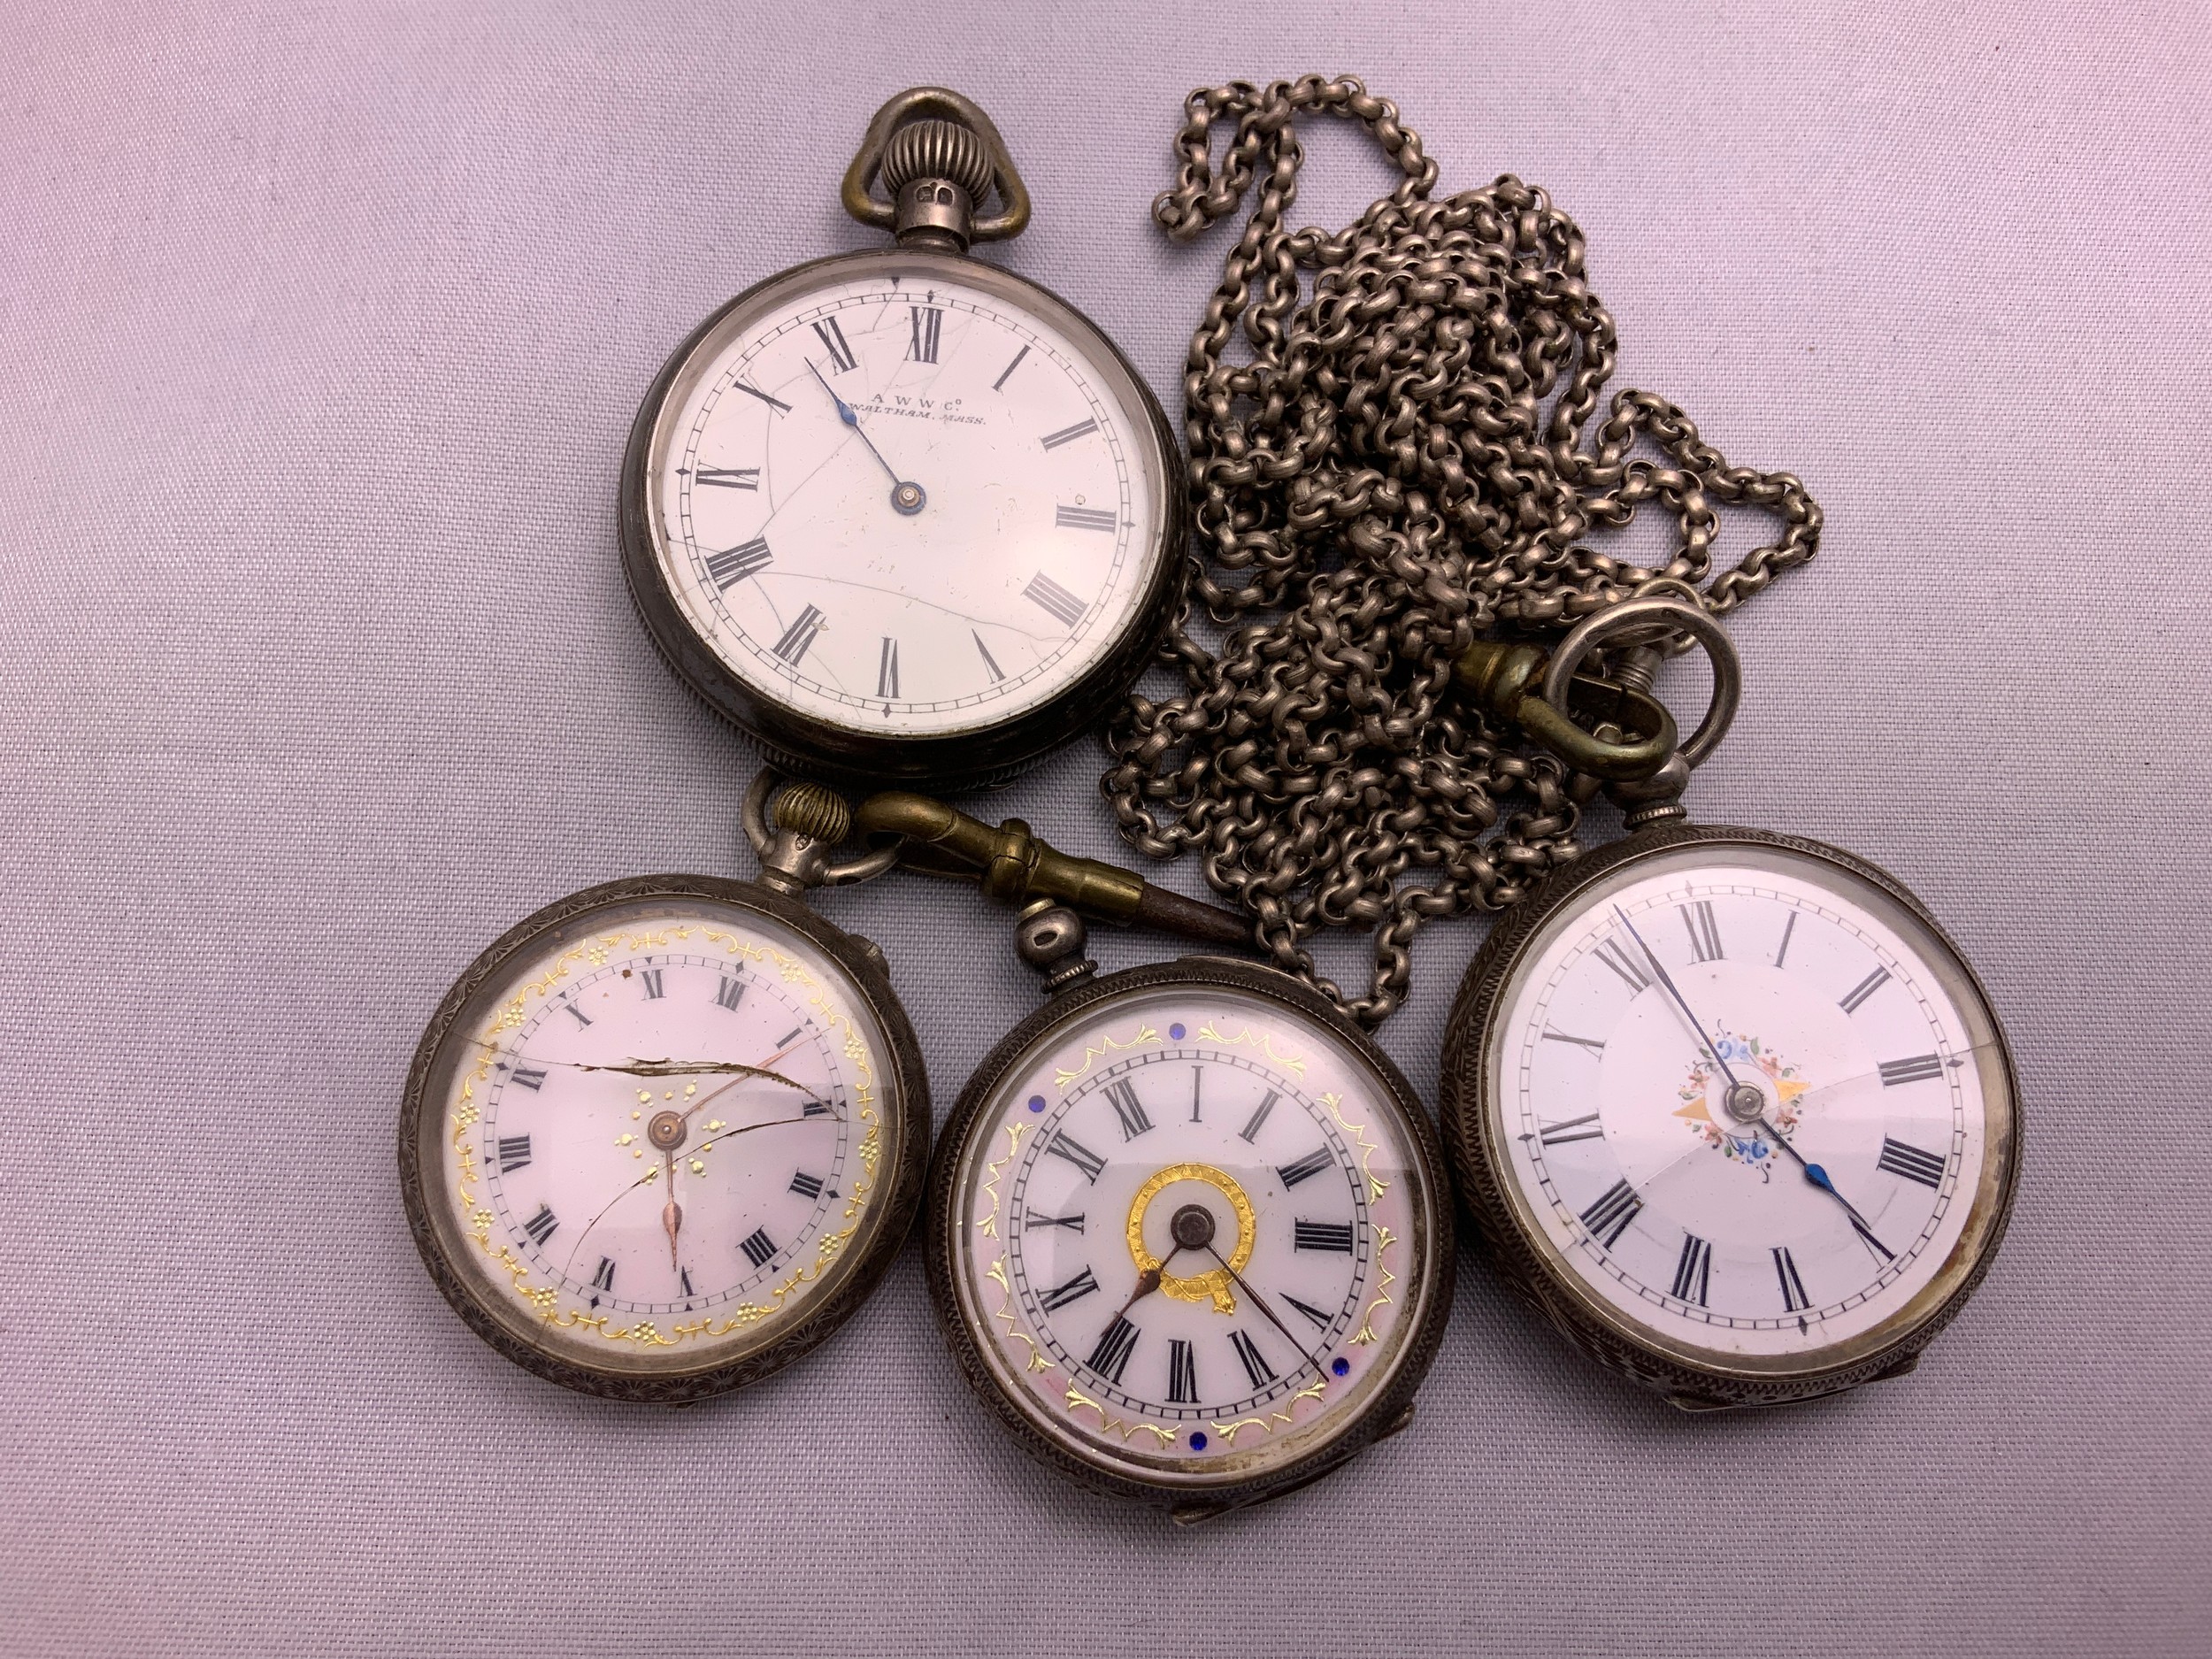 4x Silver Pocket Watches and Silver Chain